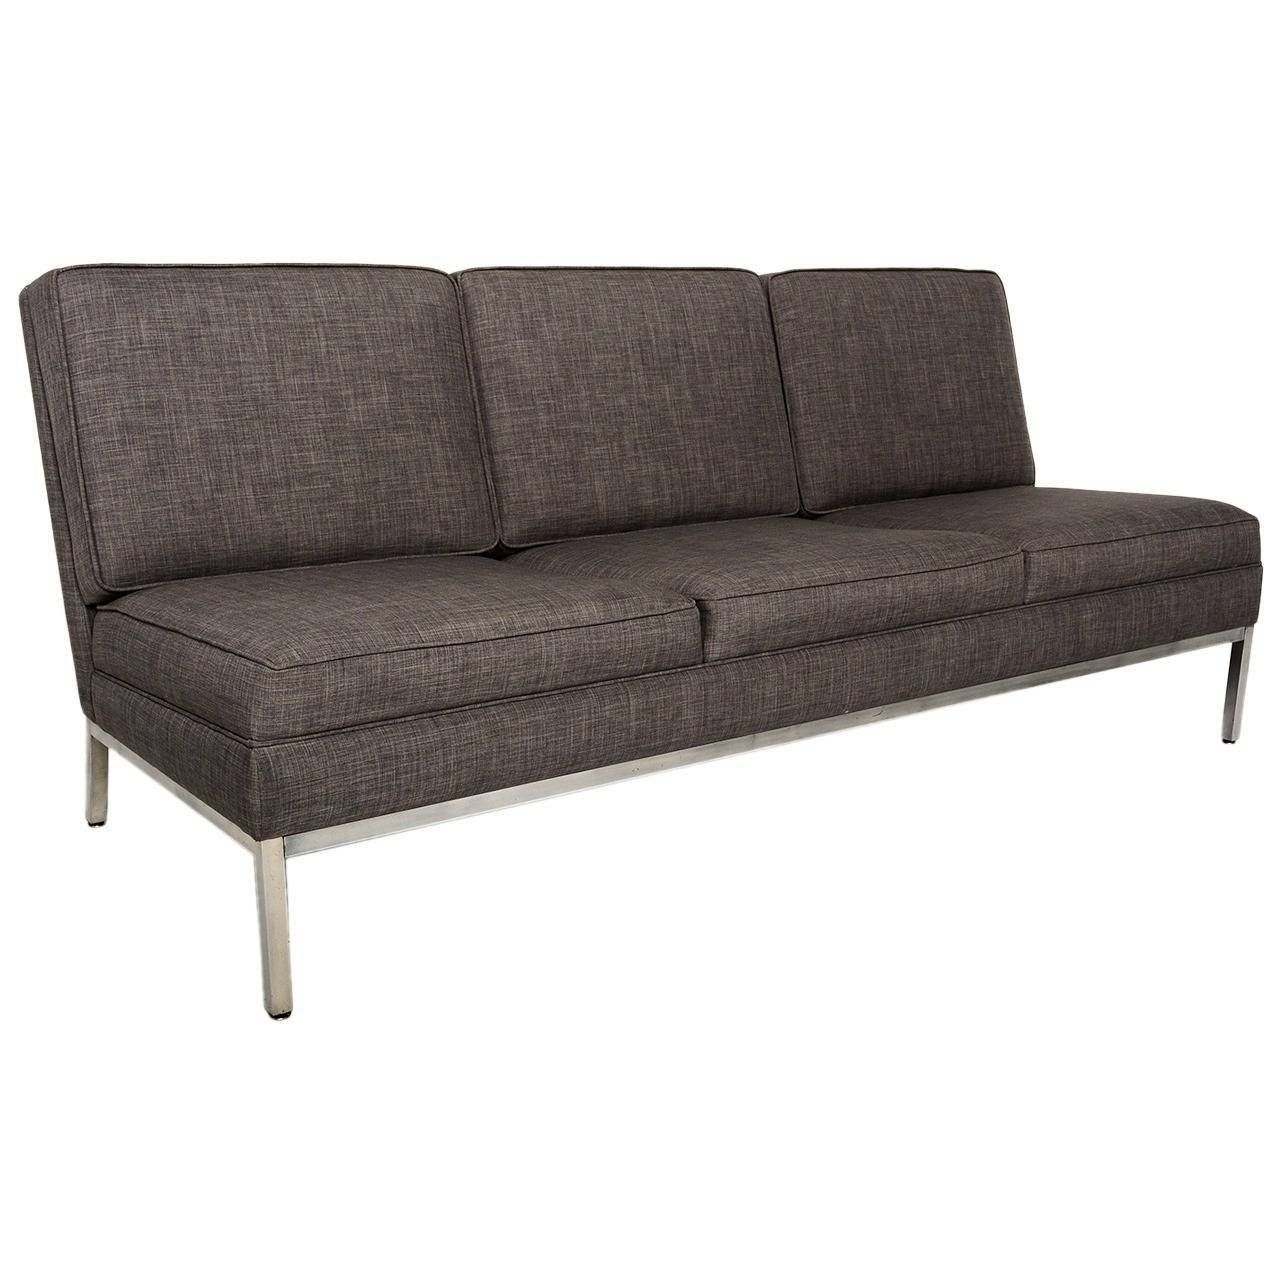 Mid Century Modern Steelcase Three Seater Sofa For Sale At 1stdibs With 3 Seater Sofas For Sale (View 17 of 30)